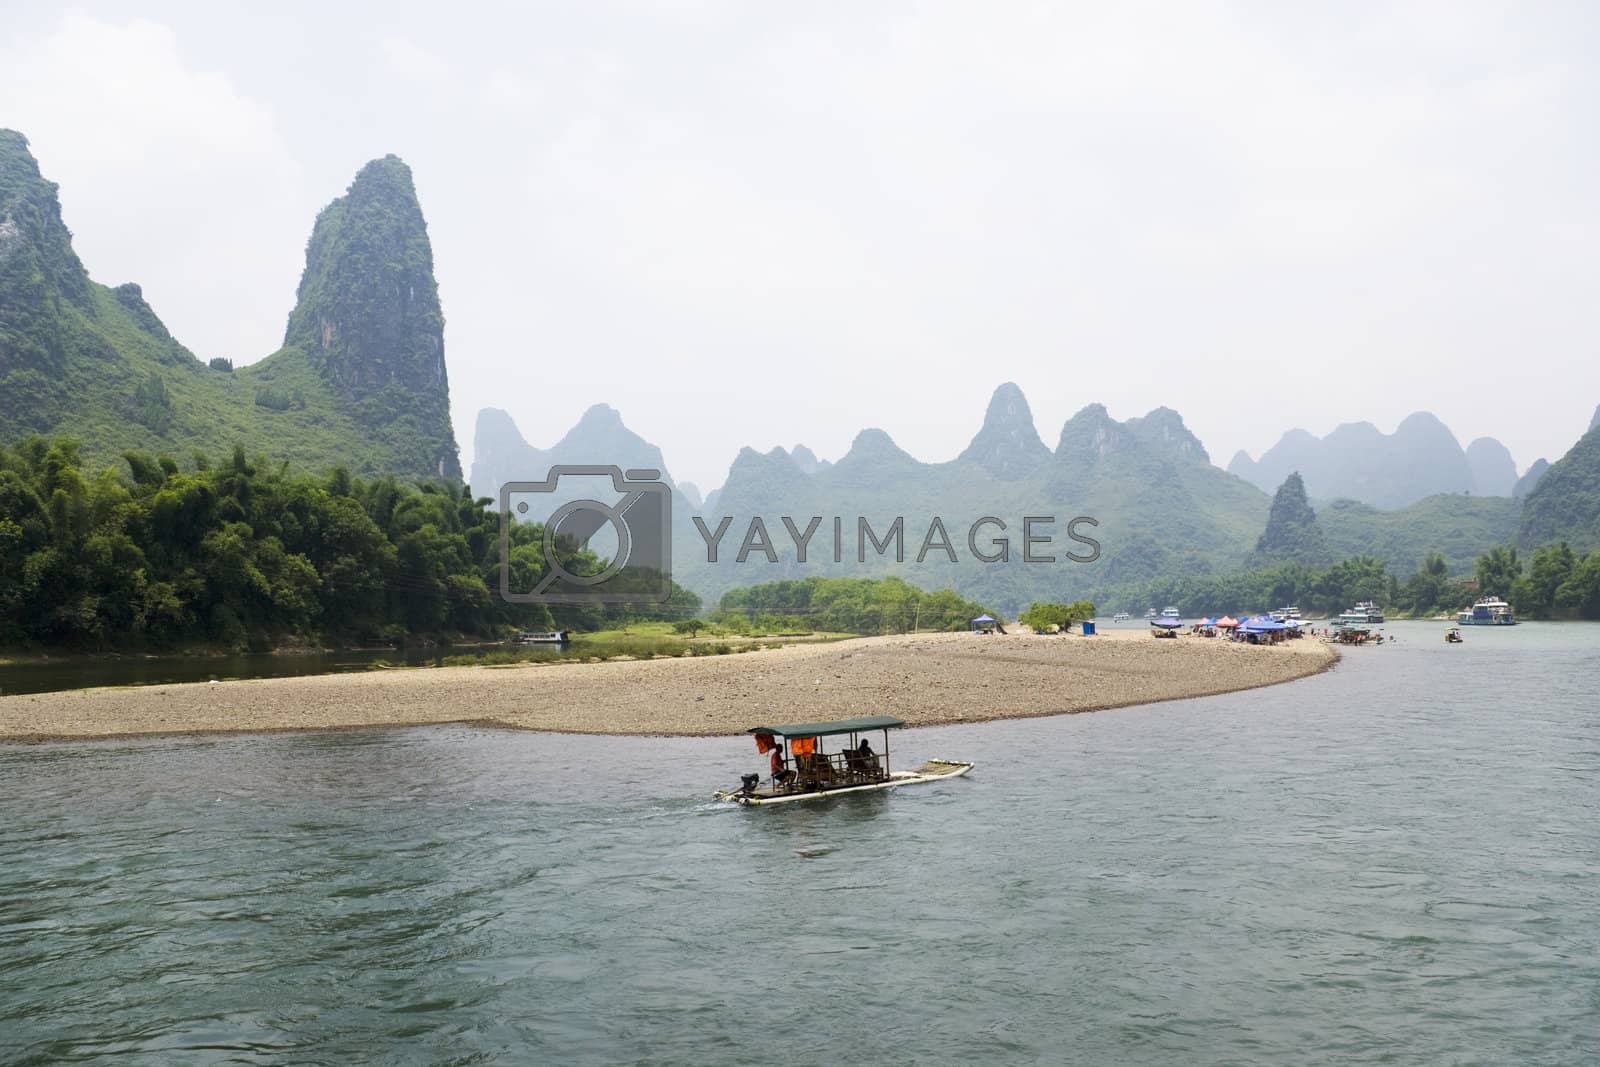 Royalty free image of Li River and Karst Mountains of Guilin by shariffc